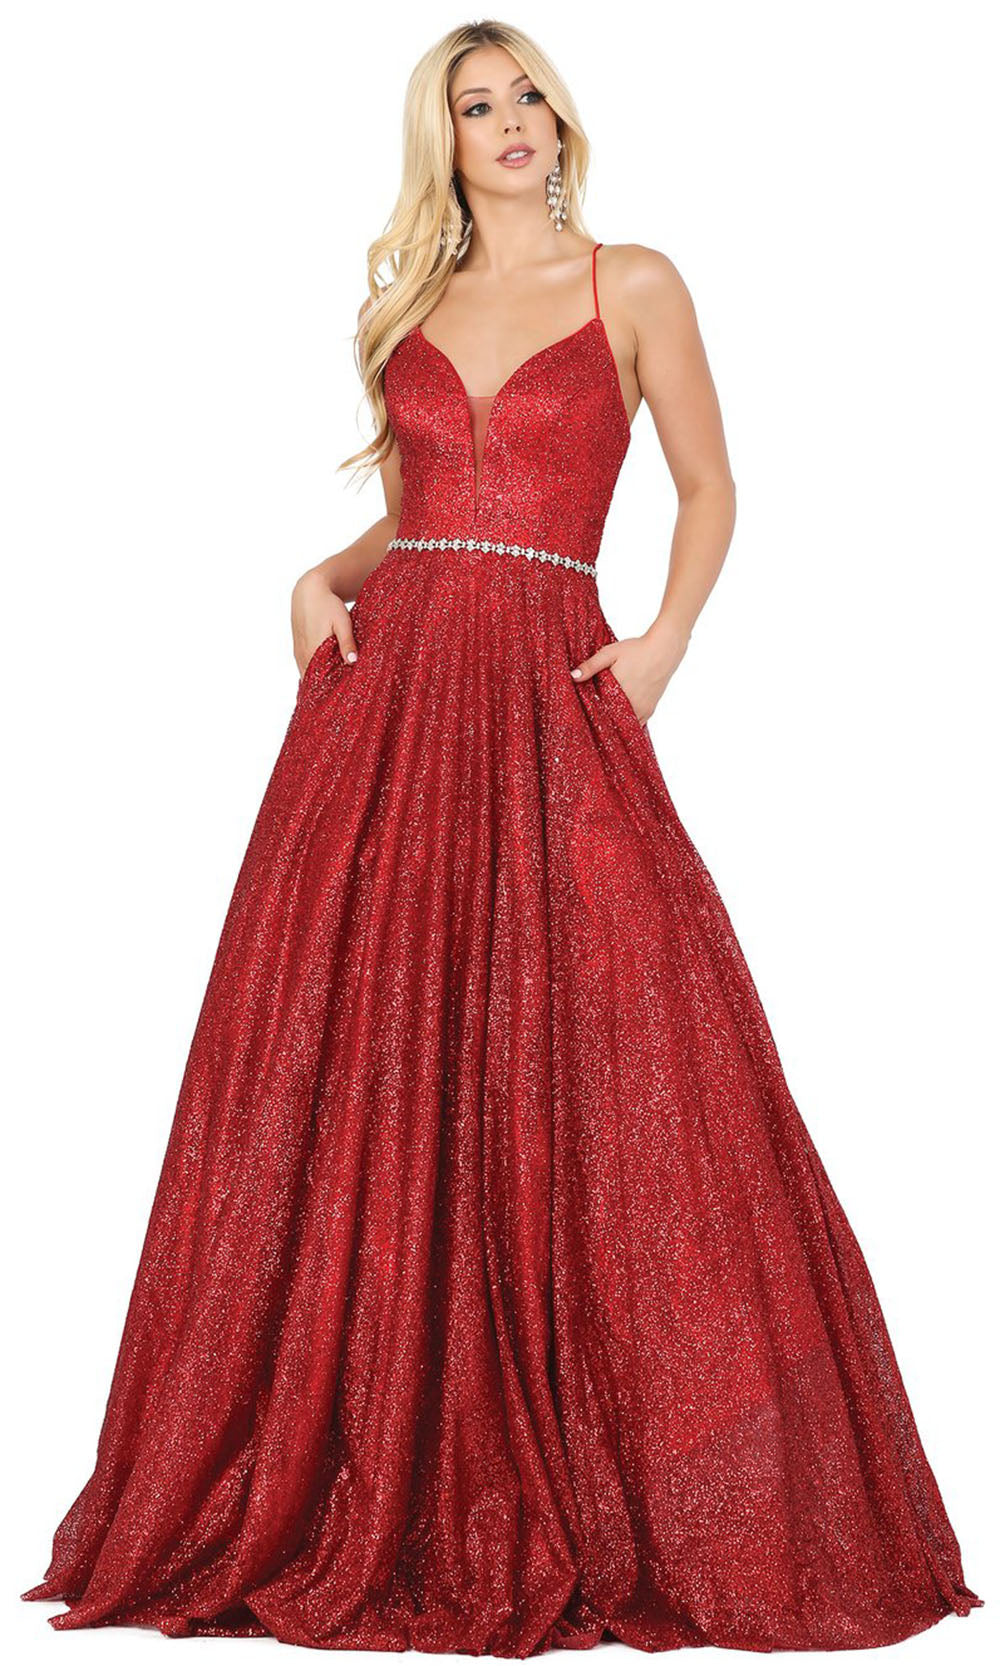 Dancing Queen - 4086 Deep V Neck Glittering A-Line Gown In Red